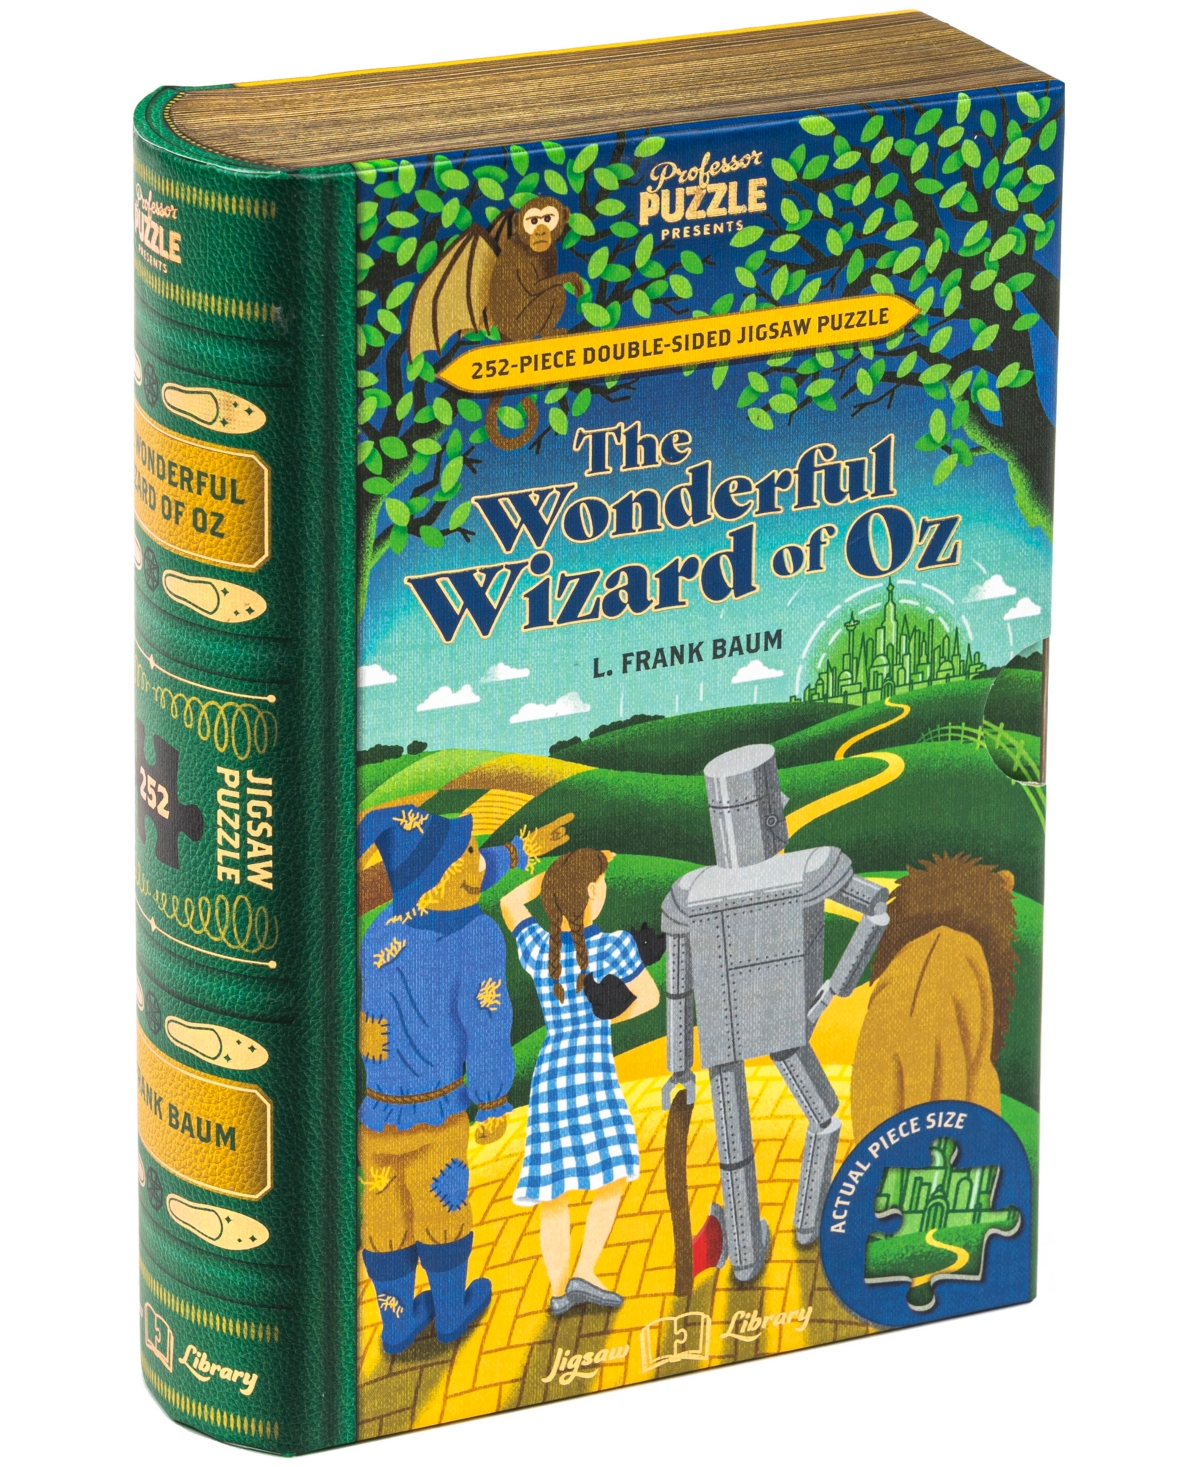 Professor Puzzle Kids' L. Frank Baum's The Wonderful Wizard Of oz Double-sided Jigsaw Puzzle Set, 252 Pieces In Multi Color